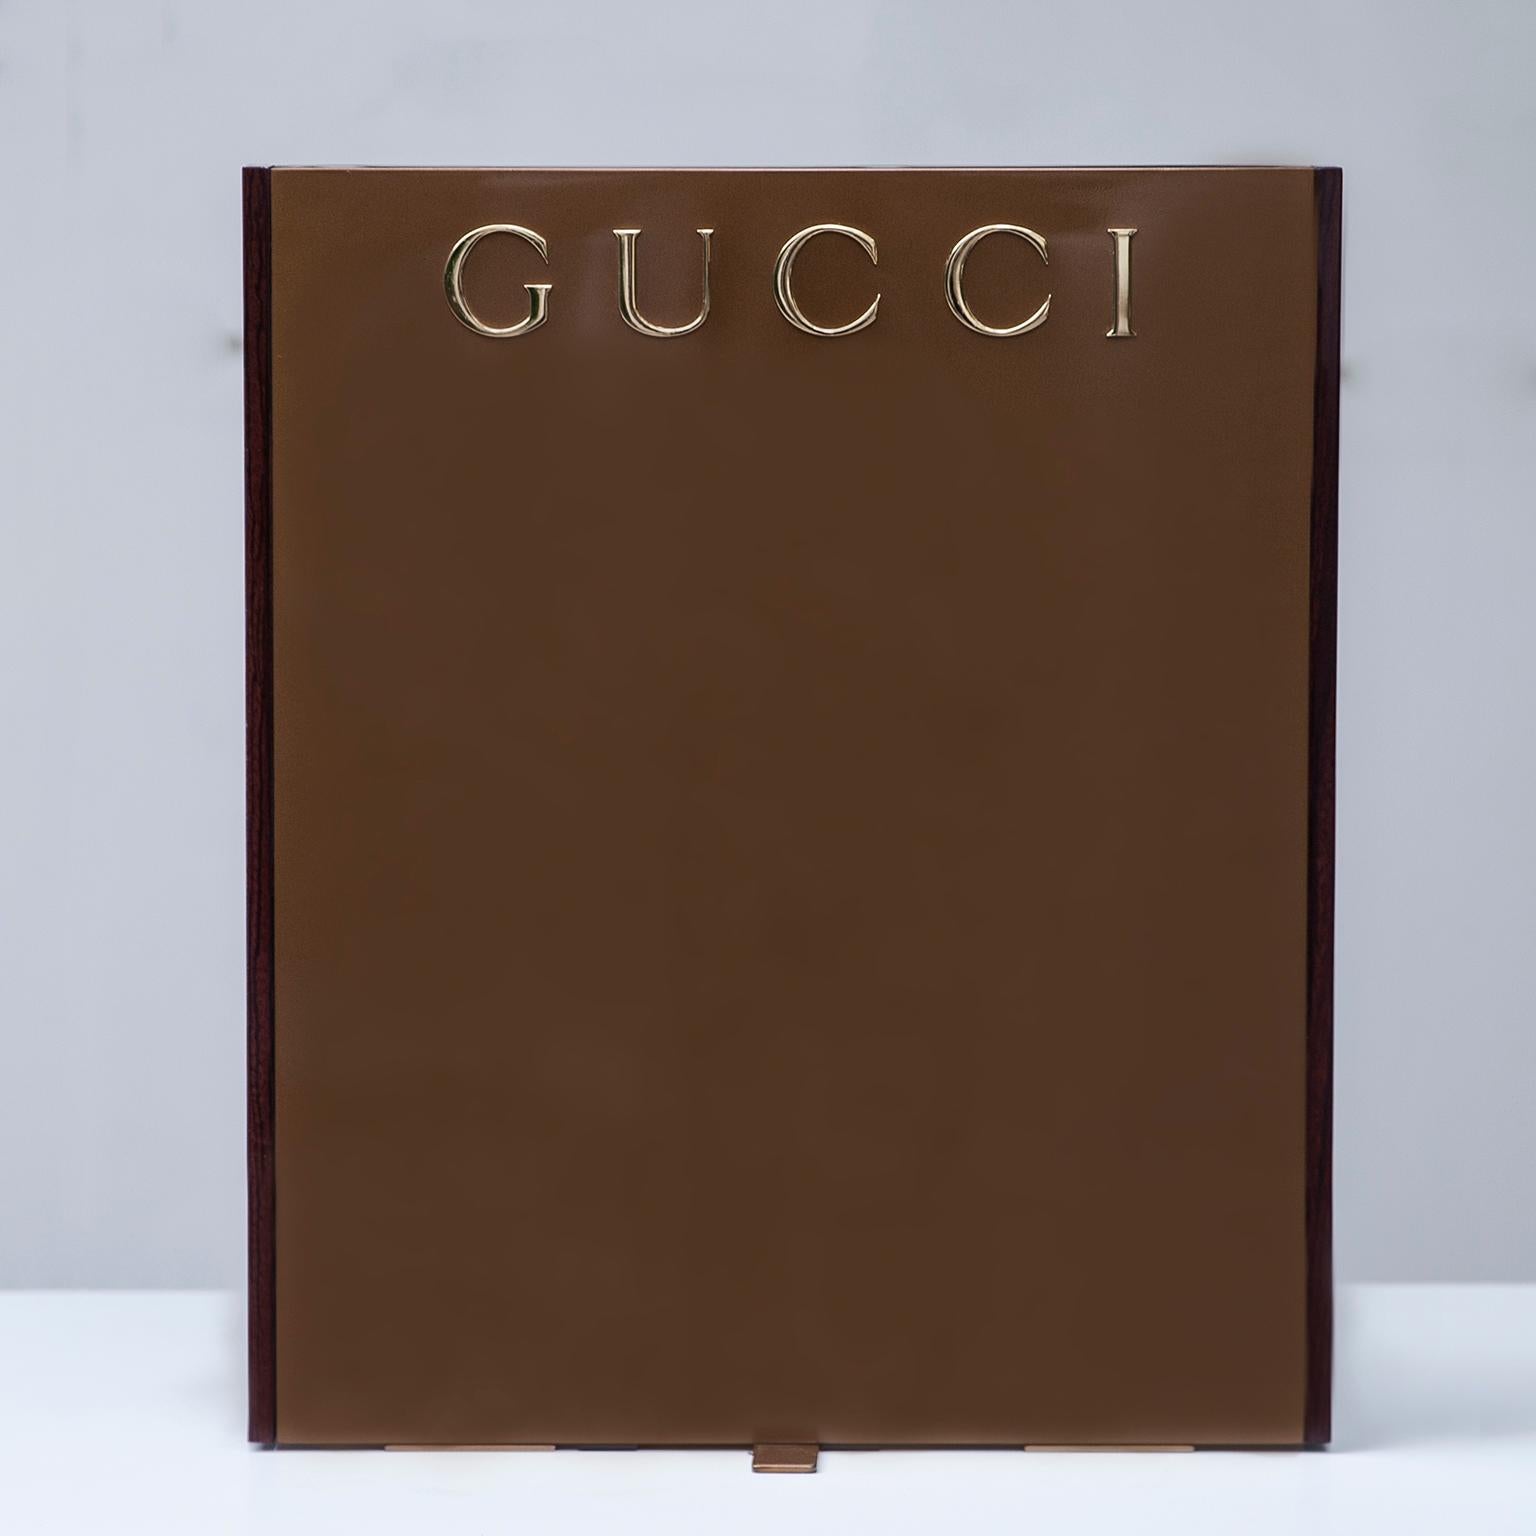 Elegant Gucci display in brown Lucite and golden metal stand.